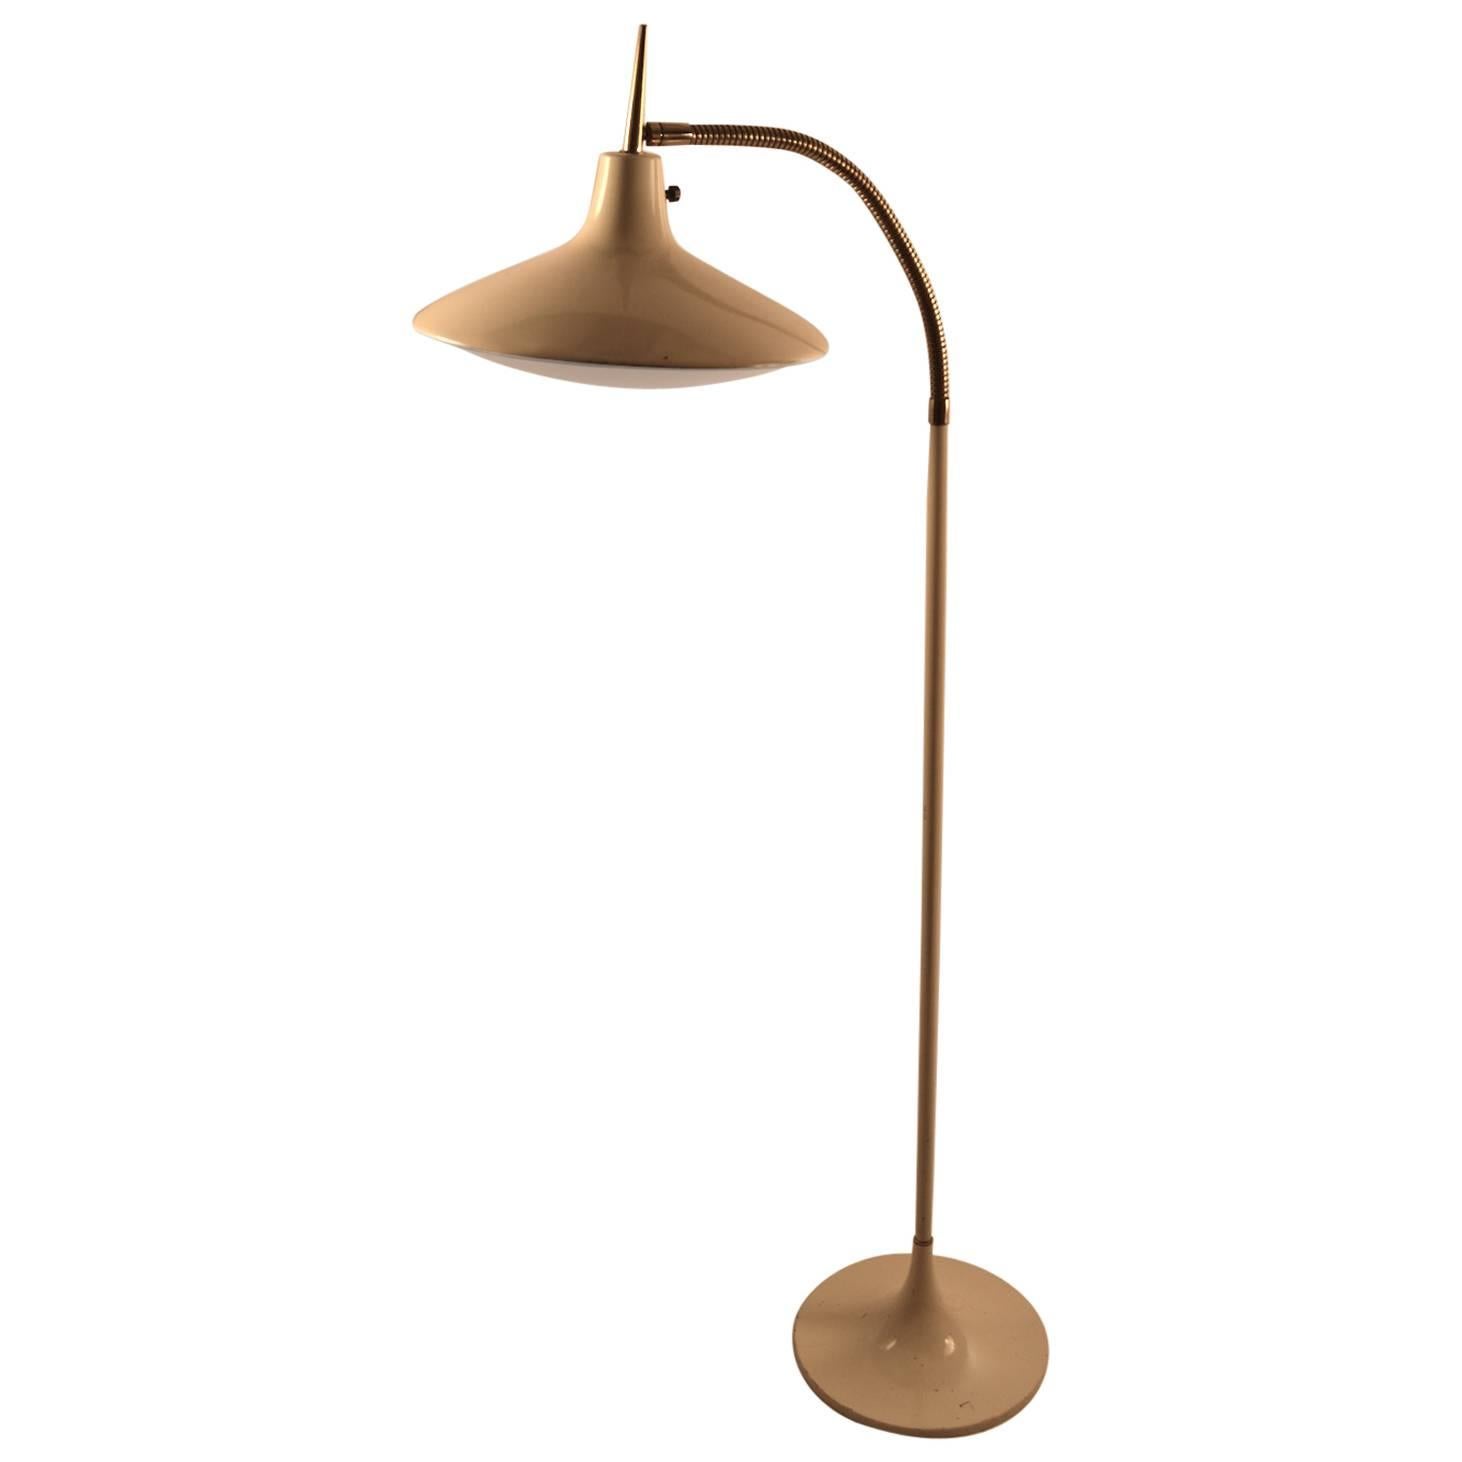 White and Brass B-683 Laurel Floor Lamp, in the style of Gio Ponti